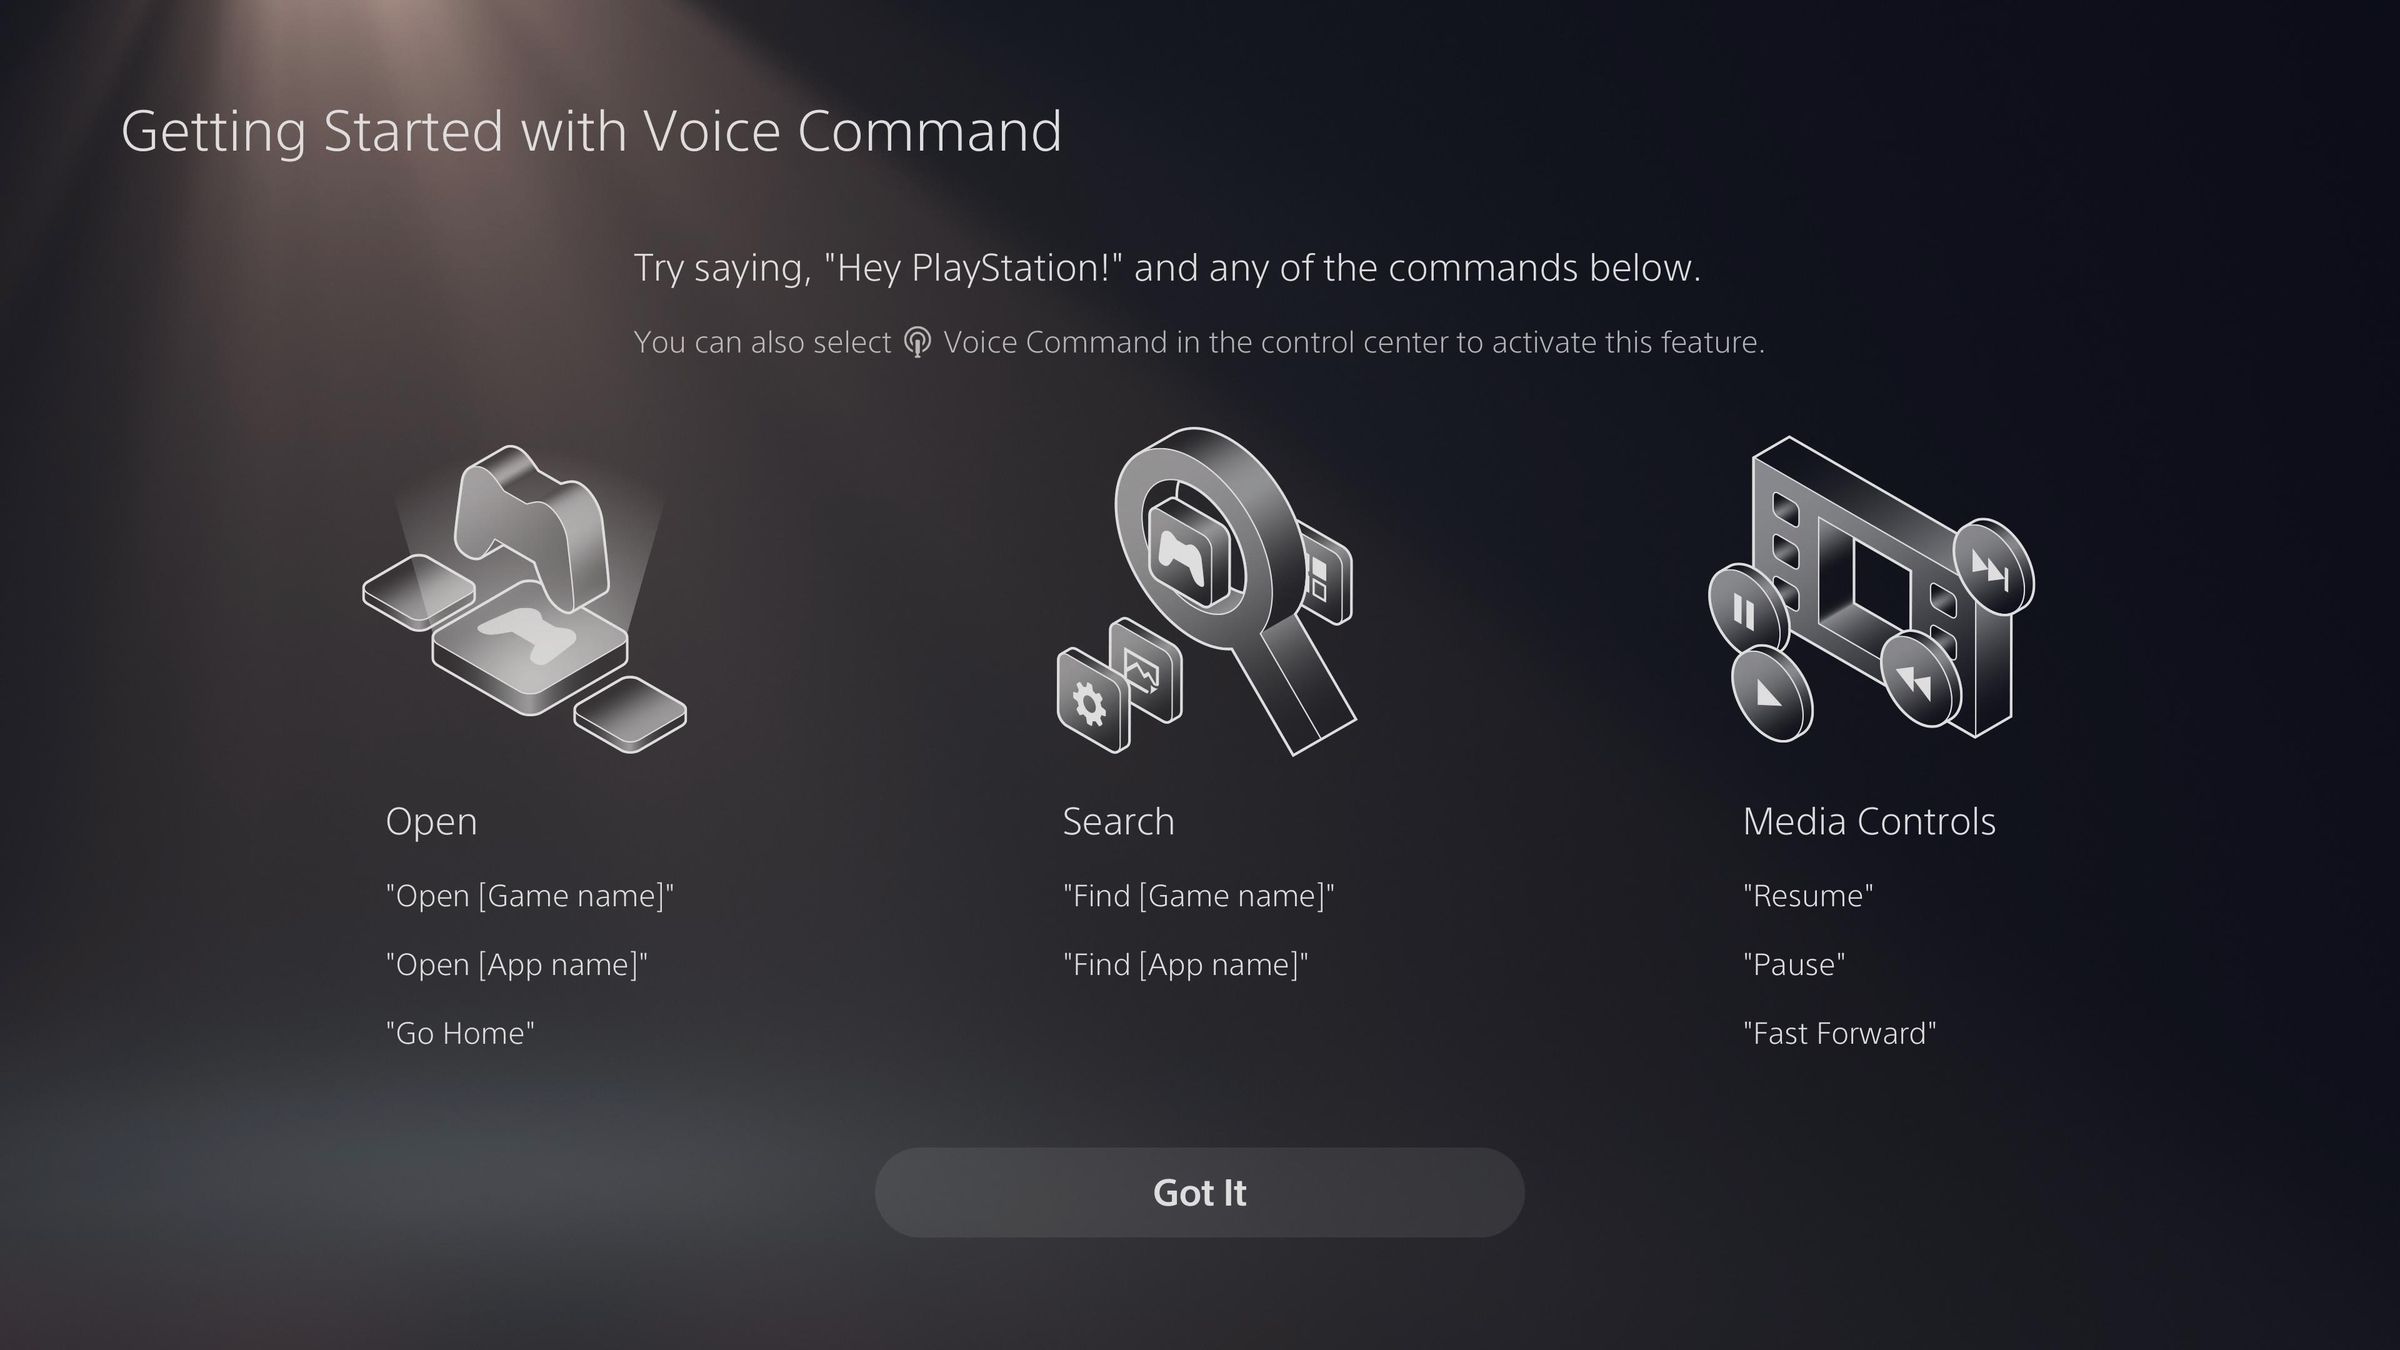 Here are some of voice commands available.